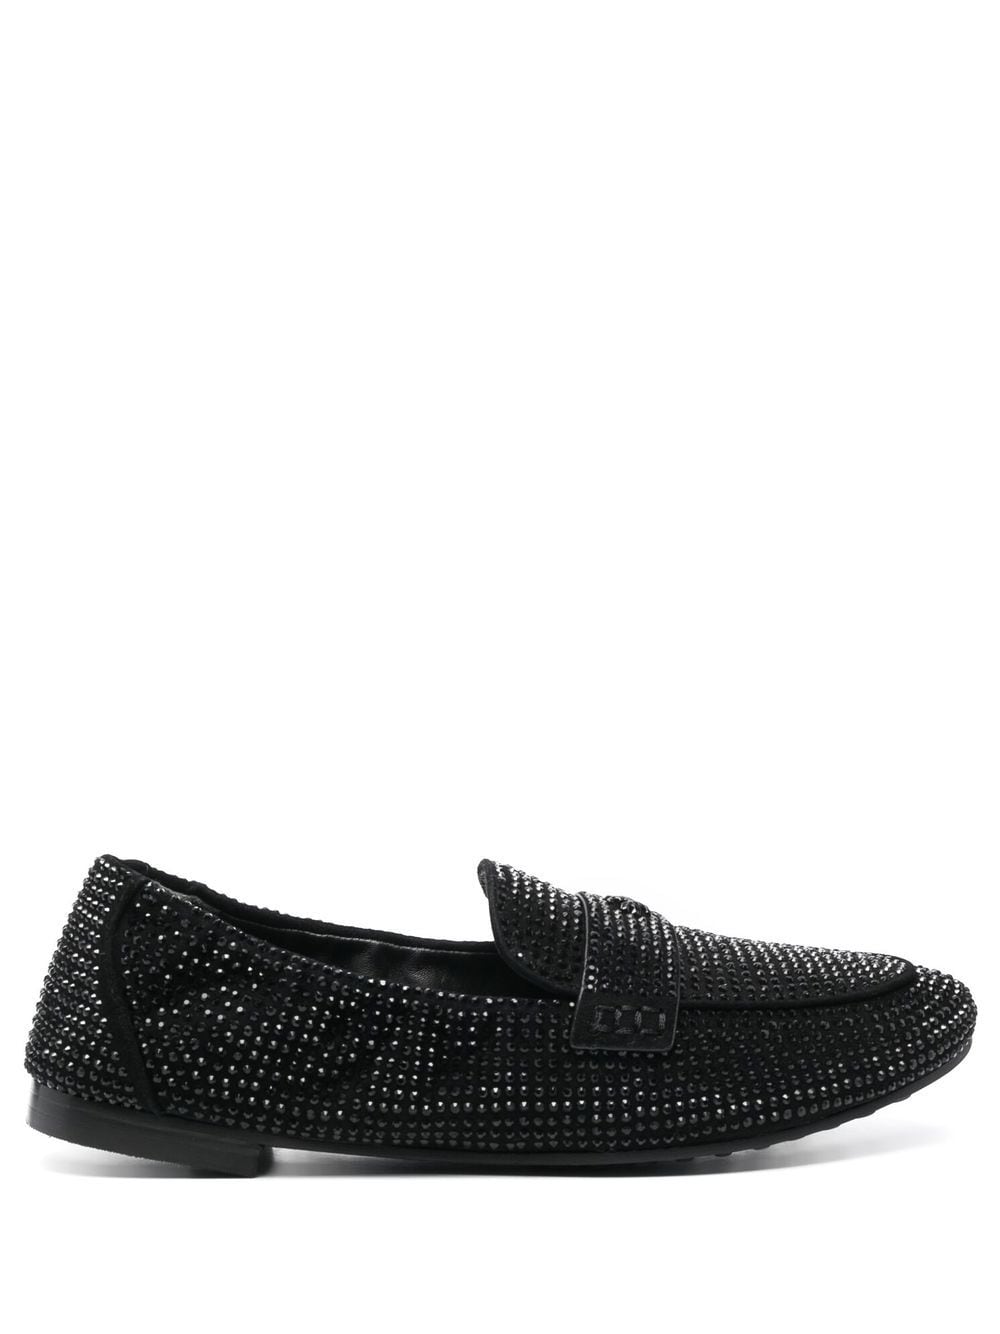 TORY BURCH CRYSTAL EMBELLISHED LOAFERS